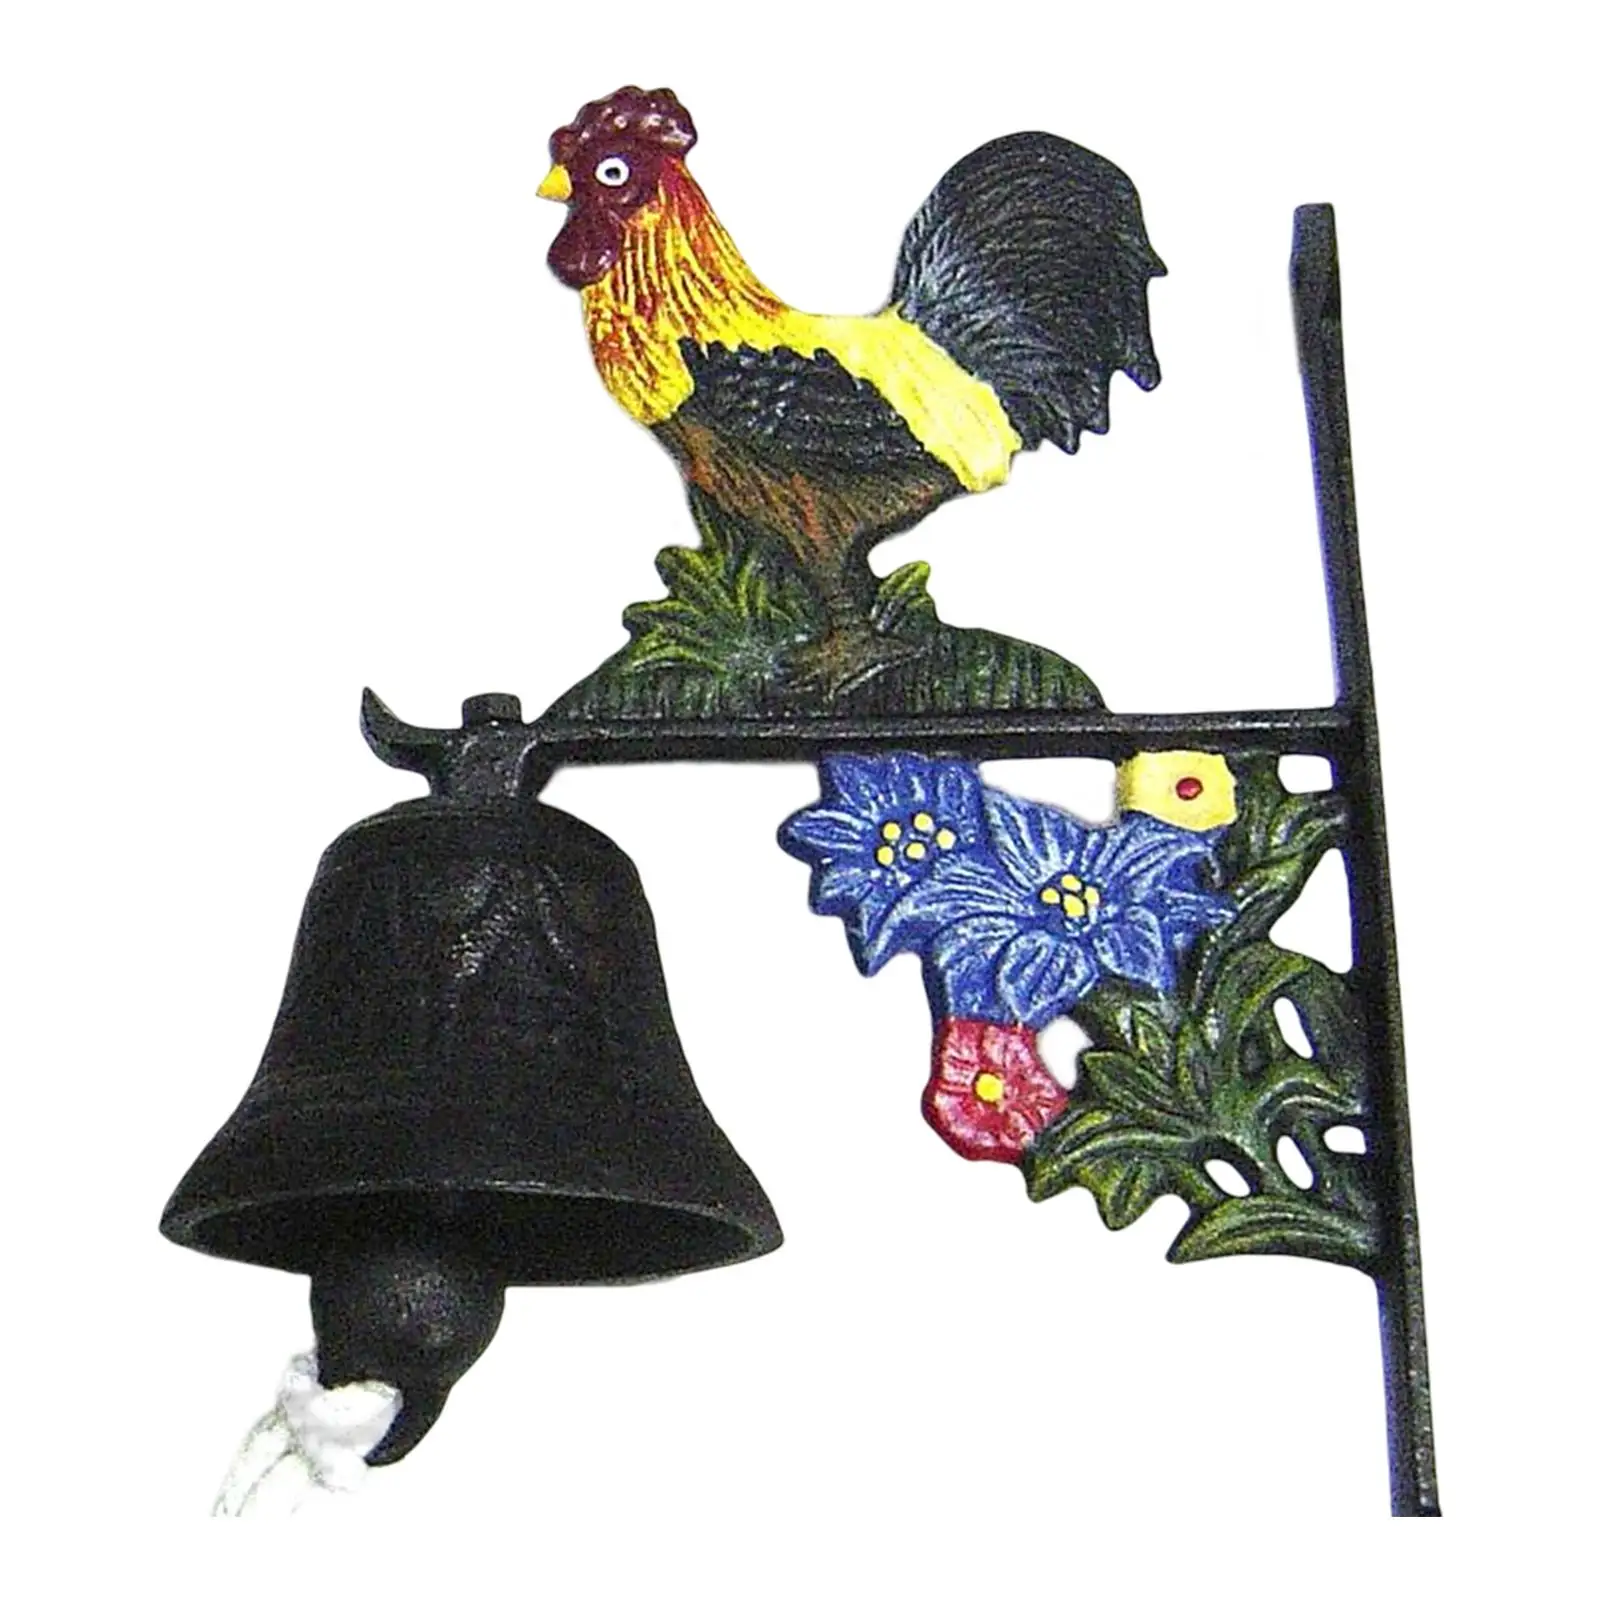 Antique Cast Doorbell Manually Shaking Hanging Decorative Bell Rooster Door Bell Indoor Farmhouse Patio Porch Decor